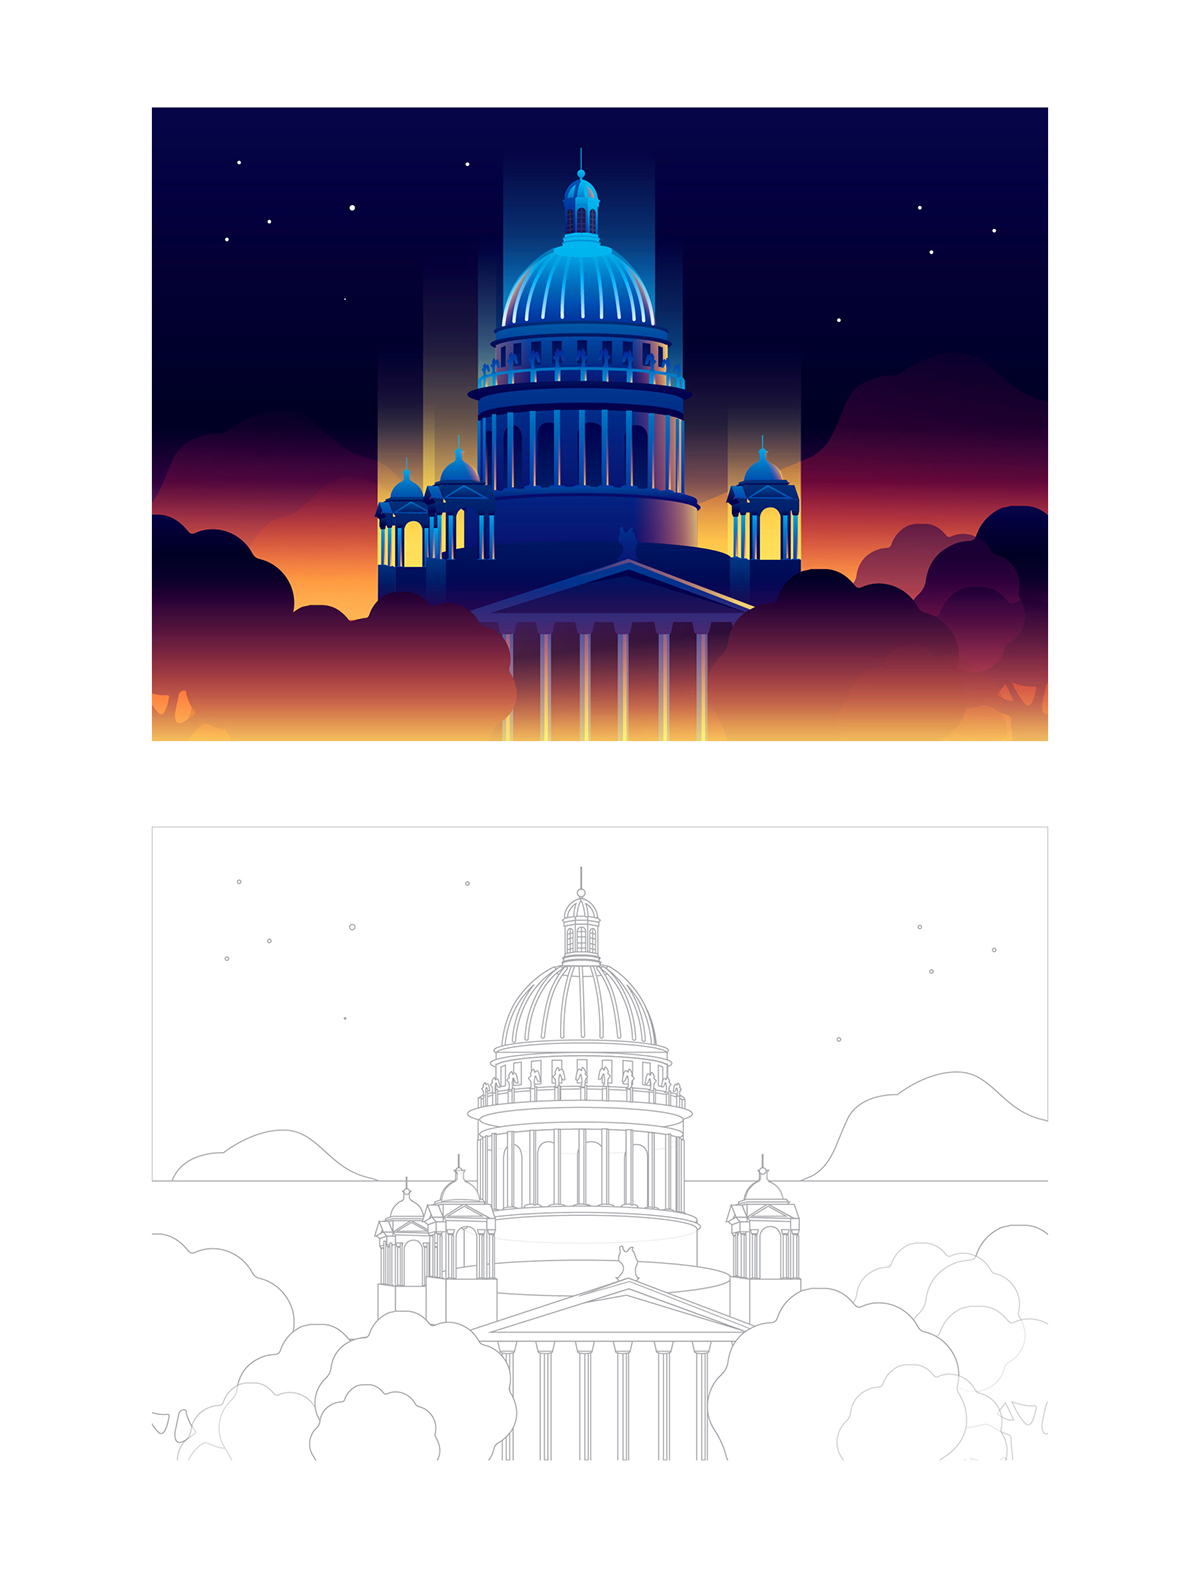 building cathedral city Colourful  ILLUSTRATION  inspiration light location petersburg night